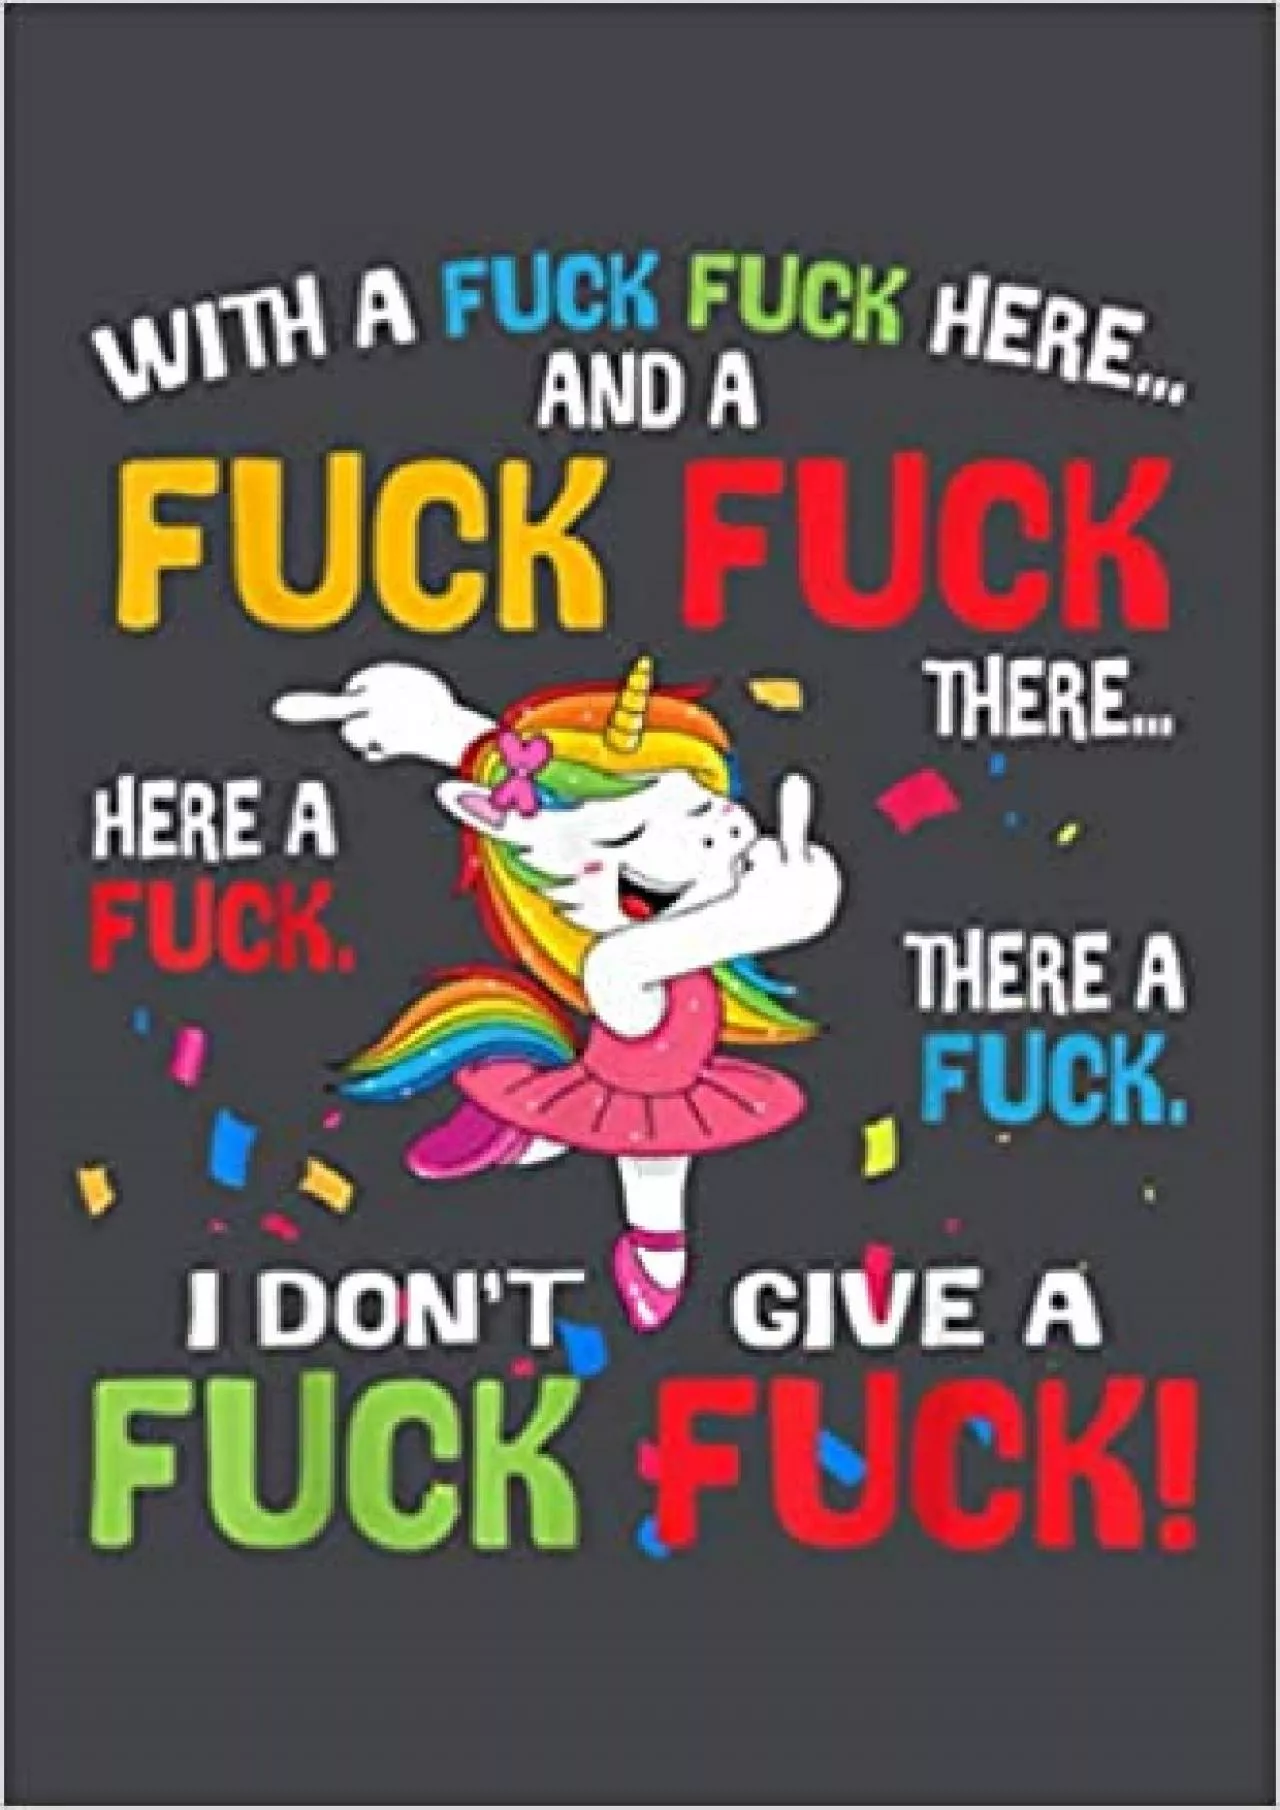 With A Fuck Fuck Here And A Fuck Fuck Unicorn Dancing: Notebook Planner -6x9 inch Daily